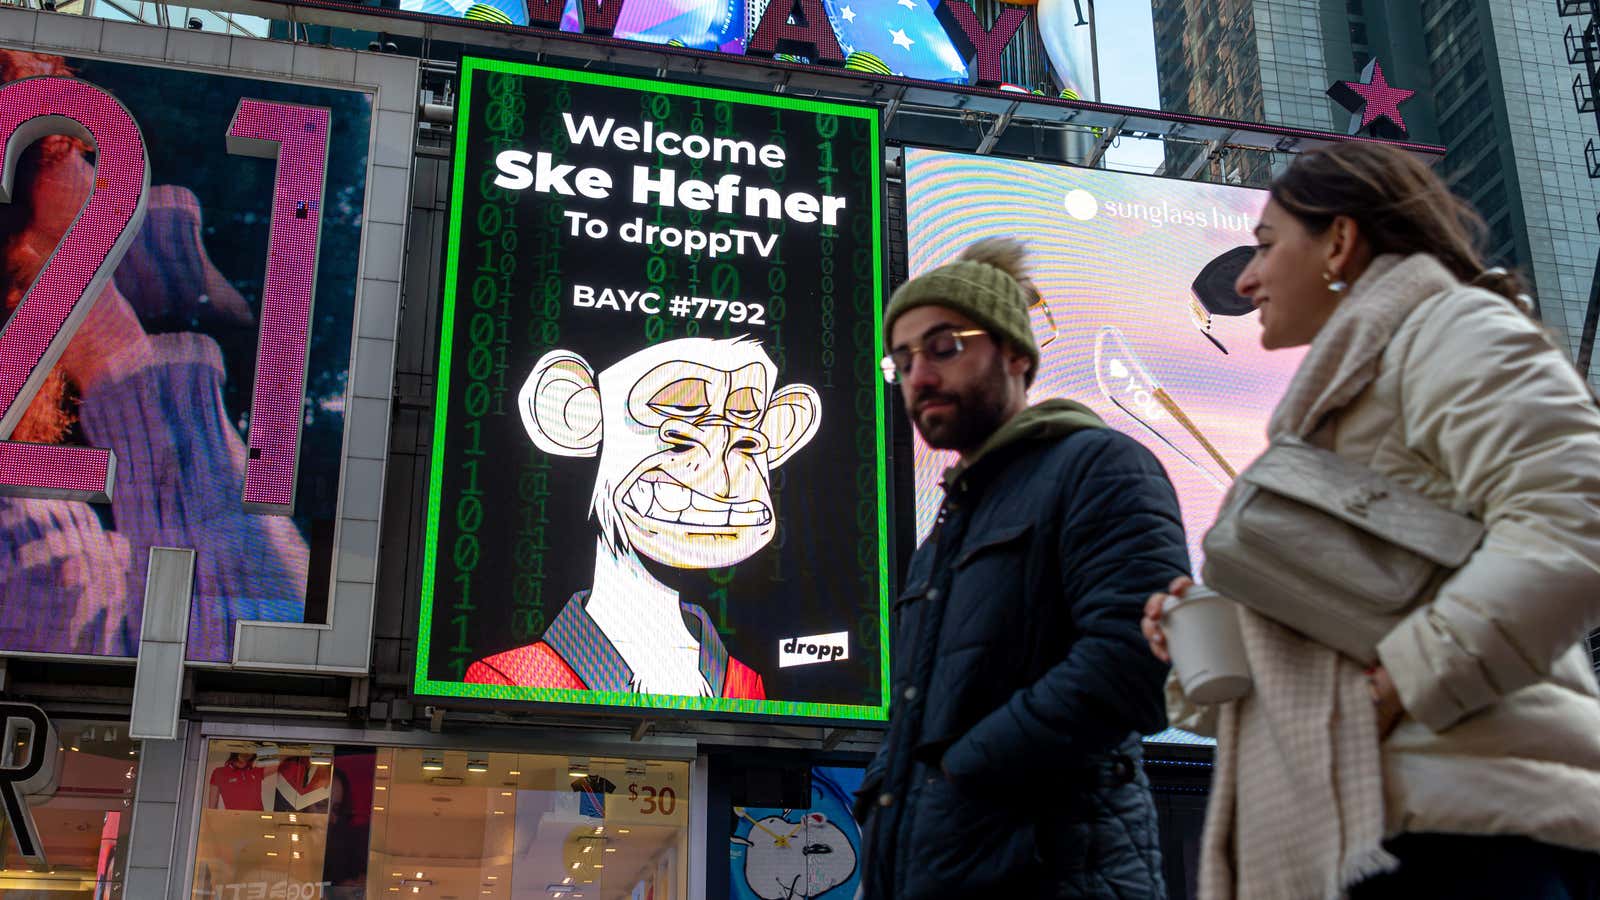 People walk by a Bored Ape Yacht Club NFT billboard in Times Square on January 25, 2022 in New York City.